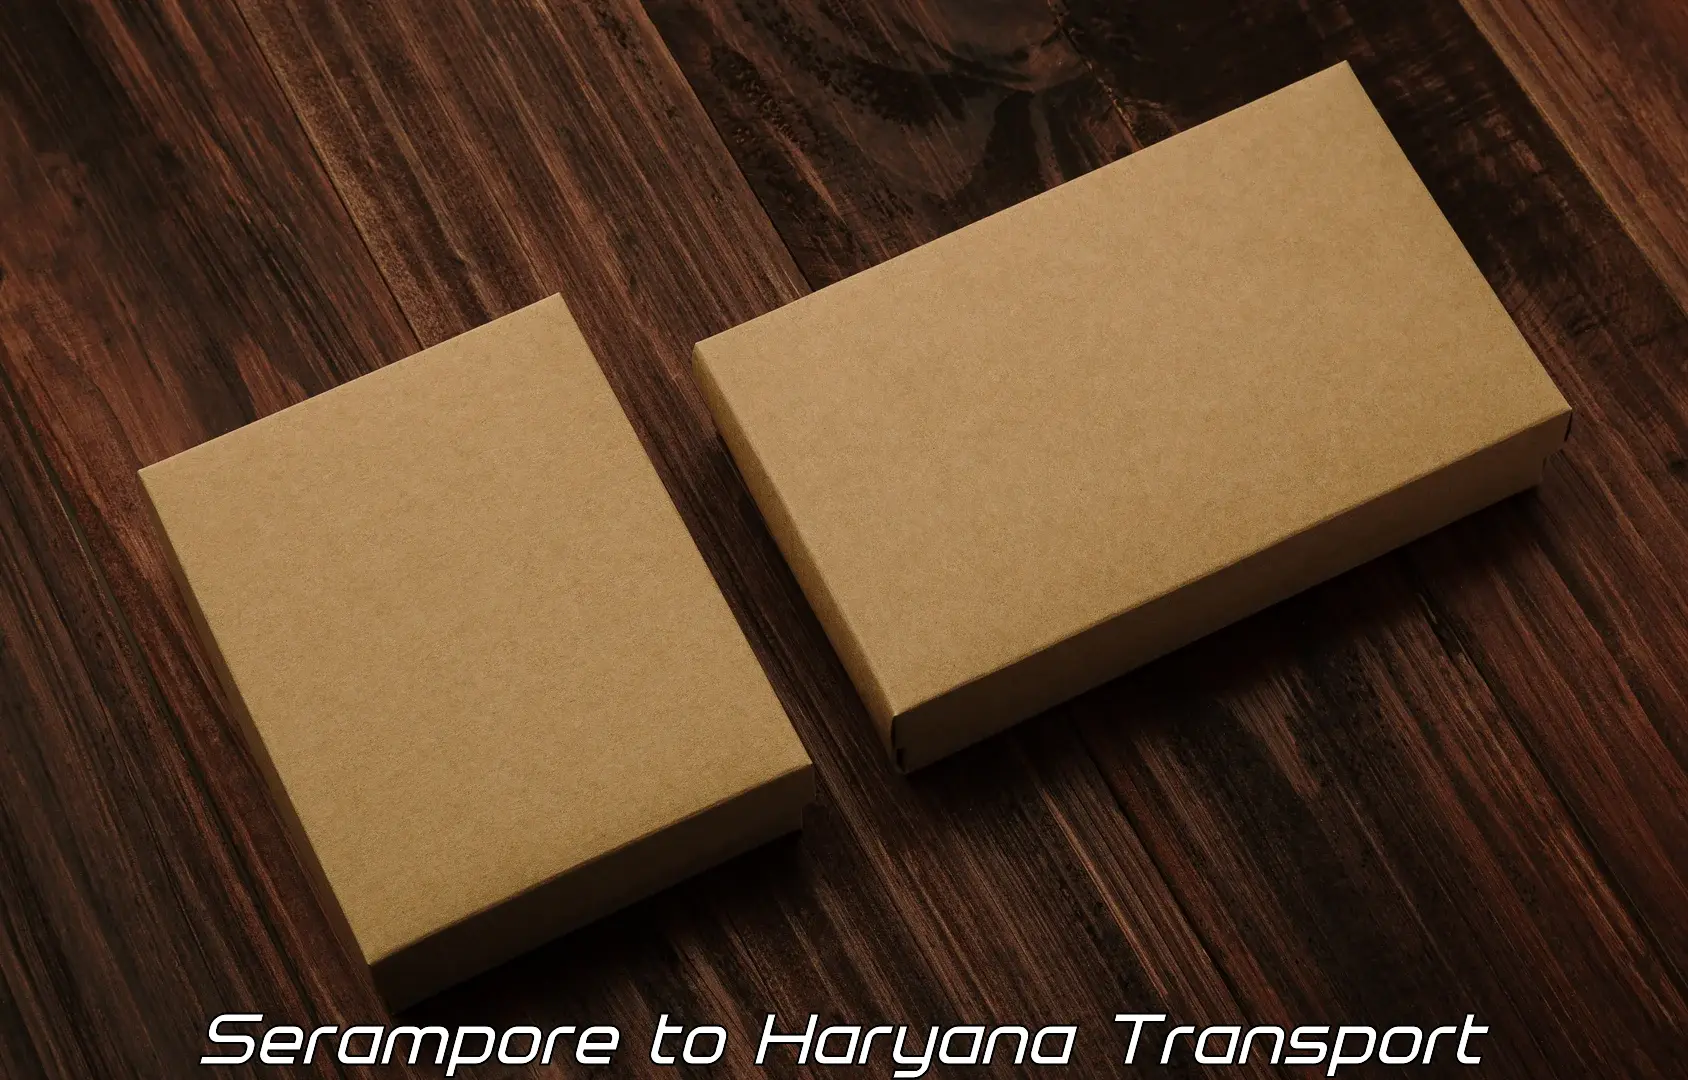 Transport shared services in Serampore to NCR Haryana